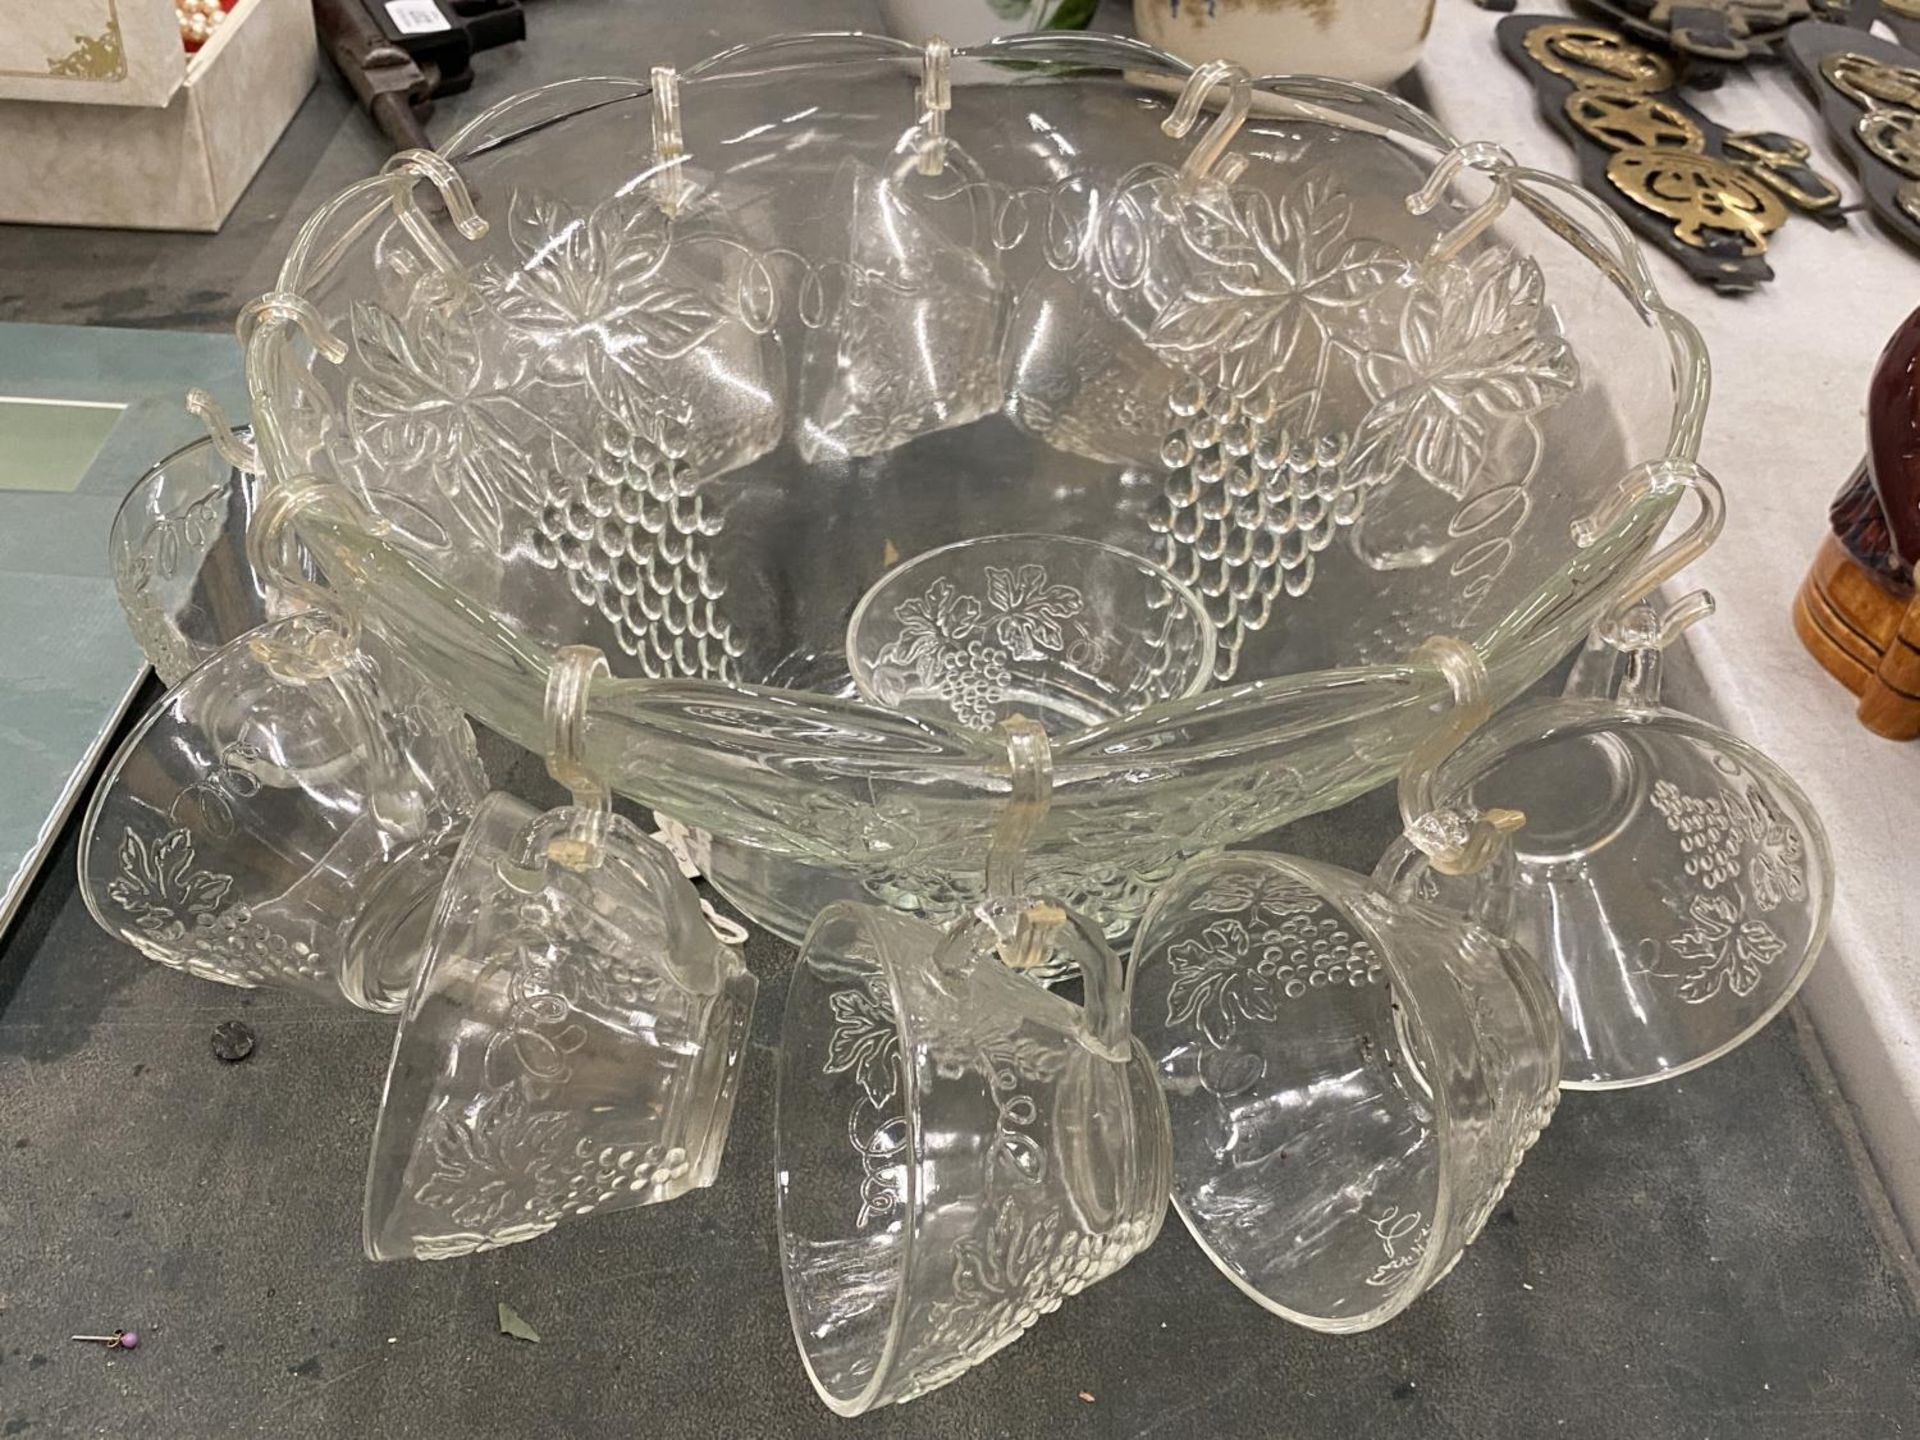 A GLASS PUNCH BOWL WITH CUPS DECORATED WITH GRAPES, TWO CHAMPAGNE FLUTES, ETC - Image 2 of 4